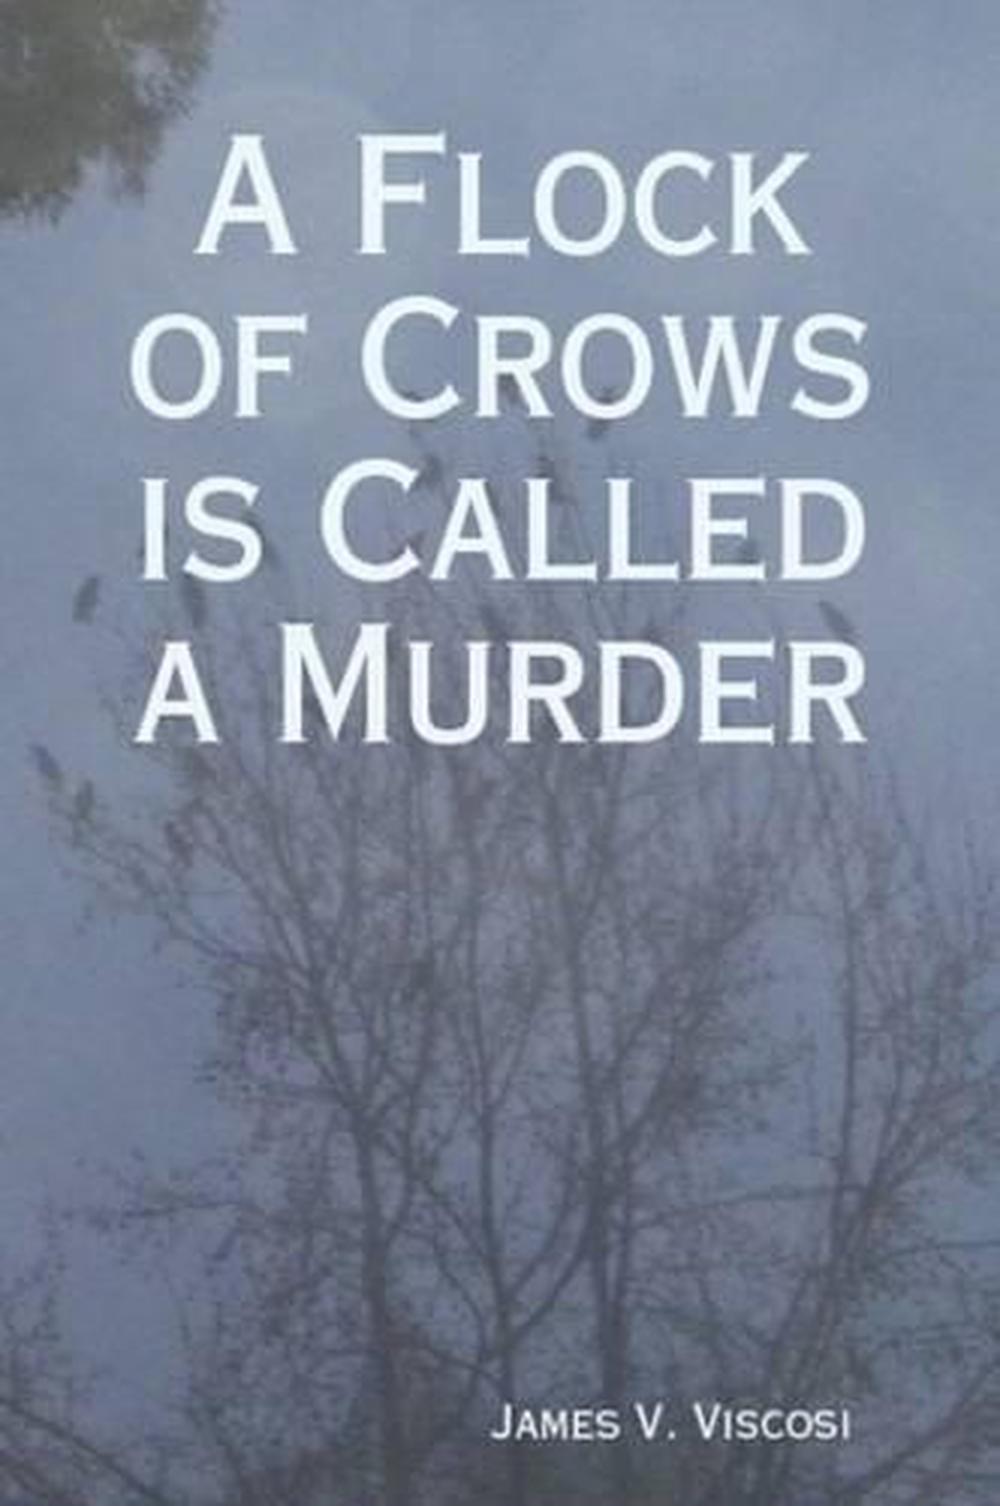 flock of crows called